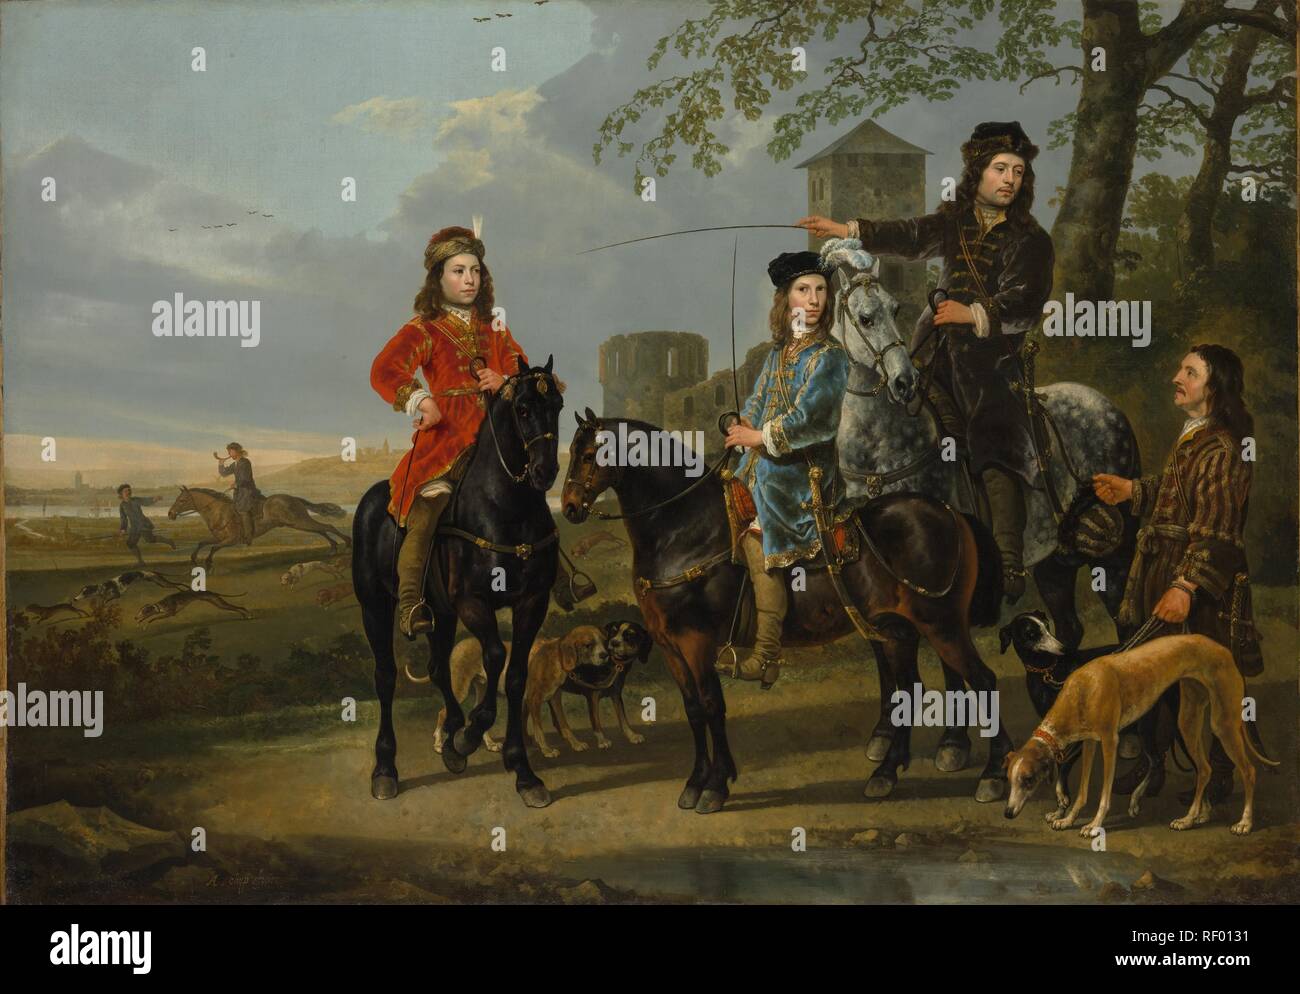 Aelbert Cuyp (Dutch, Dordrecht 1620â€“1691 Dordrecht) Equestrian Portrait of Cornelis (1639â€“1680) and Michiel Pompe van Meerdervoort (1638â€“1653) with Their Tutor and Coachman ('Starting for the Hunt'), ca. 1652â€“53 Oil on canvas; 43 1/4 x 61 1/2in. (109.9 x 156.2cm)  The Metropolitan Museum of Art, New York, The Friedsam Collection, Bequest of Michael Friedsam, 1931 (32.100.20) http://www.metmuseum.org/Collections/search-the-collections/436063 Stock Photo